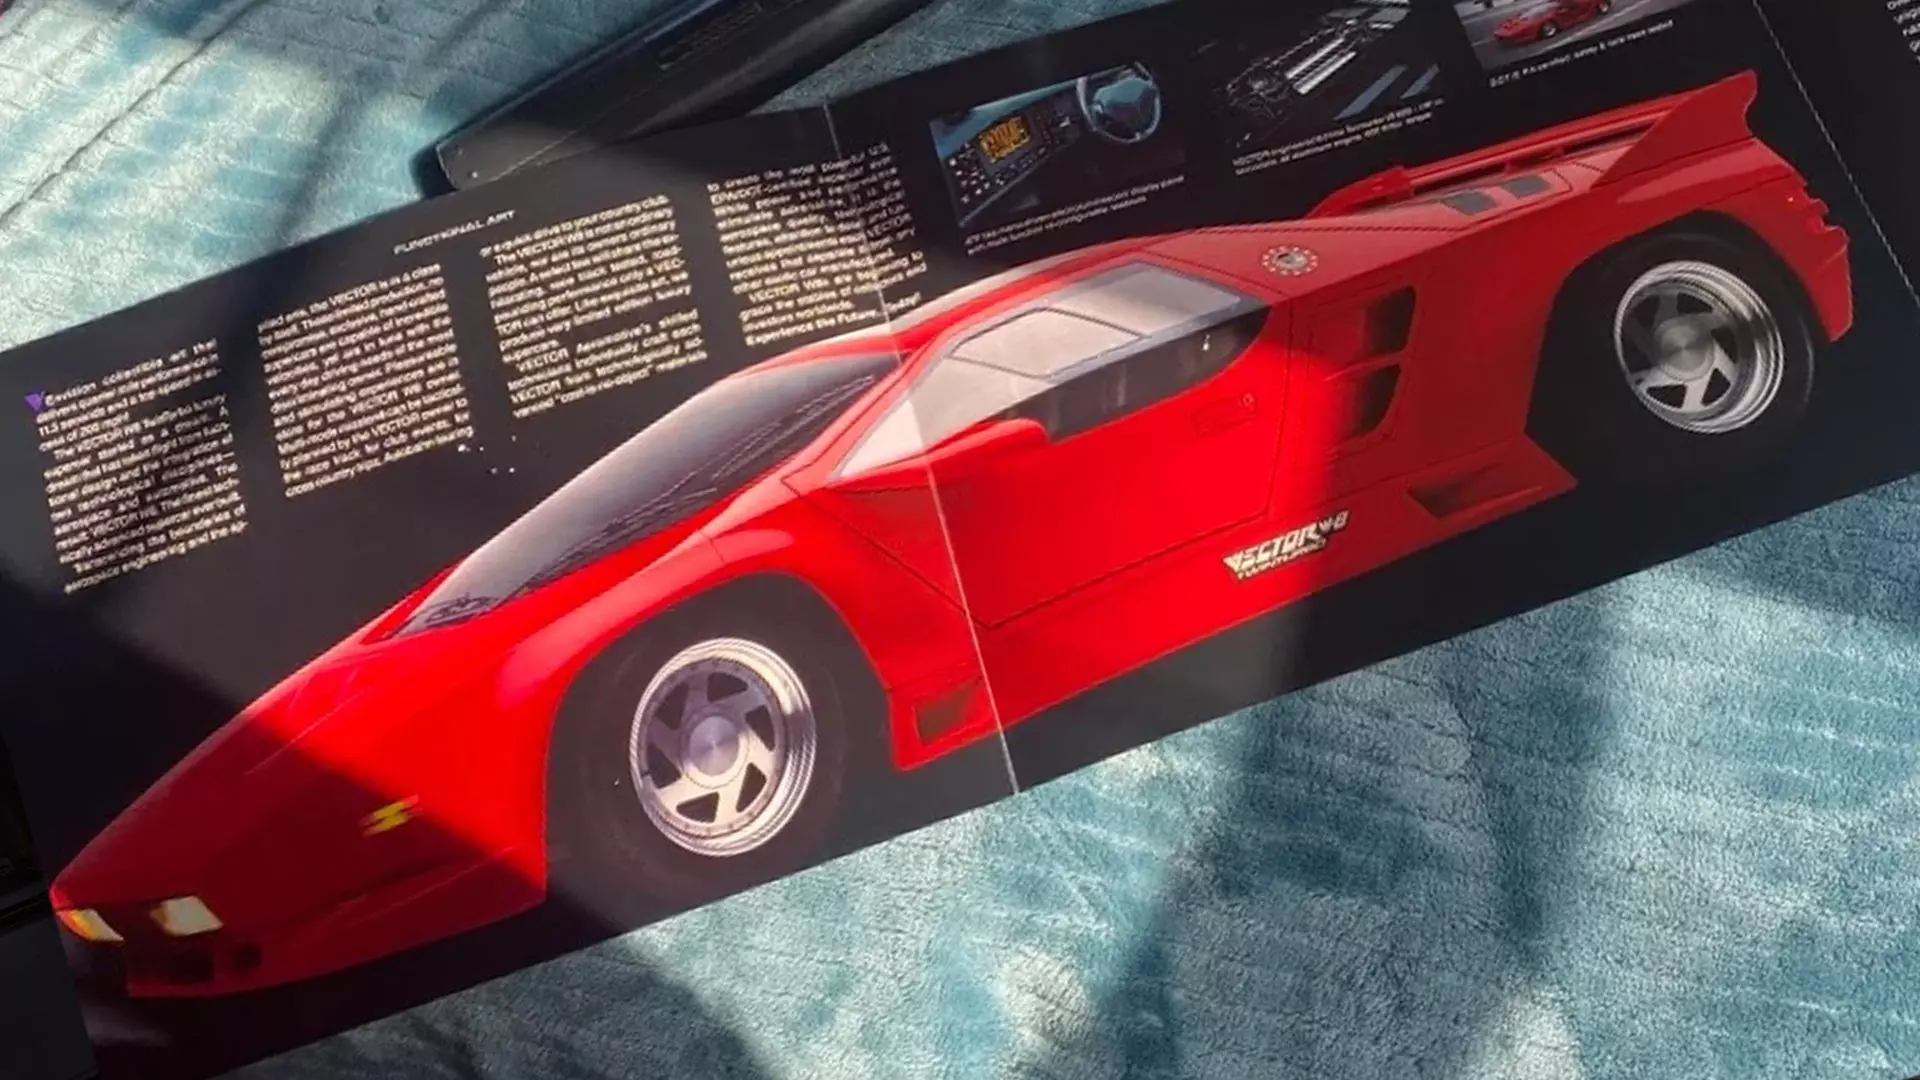 This Vector W8 Brochure Is a Cool Artifact From a Wild Moment American in Supercar History | Autance